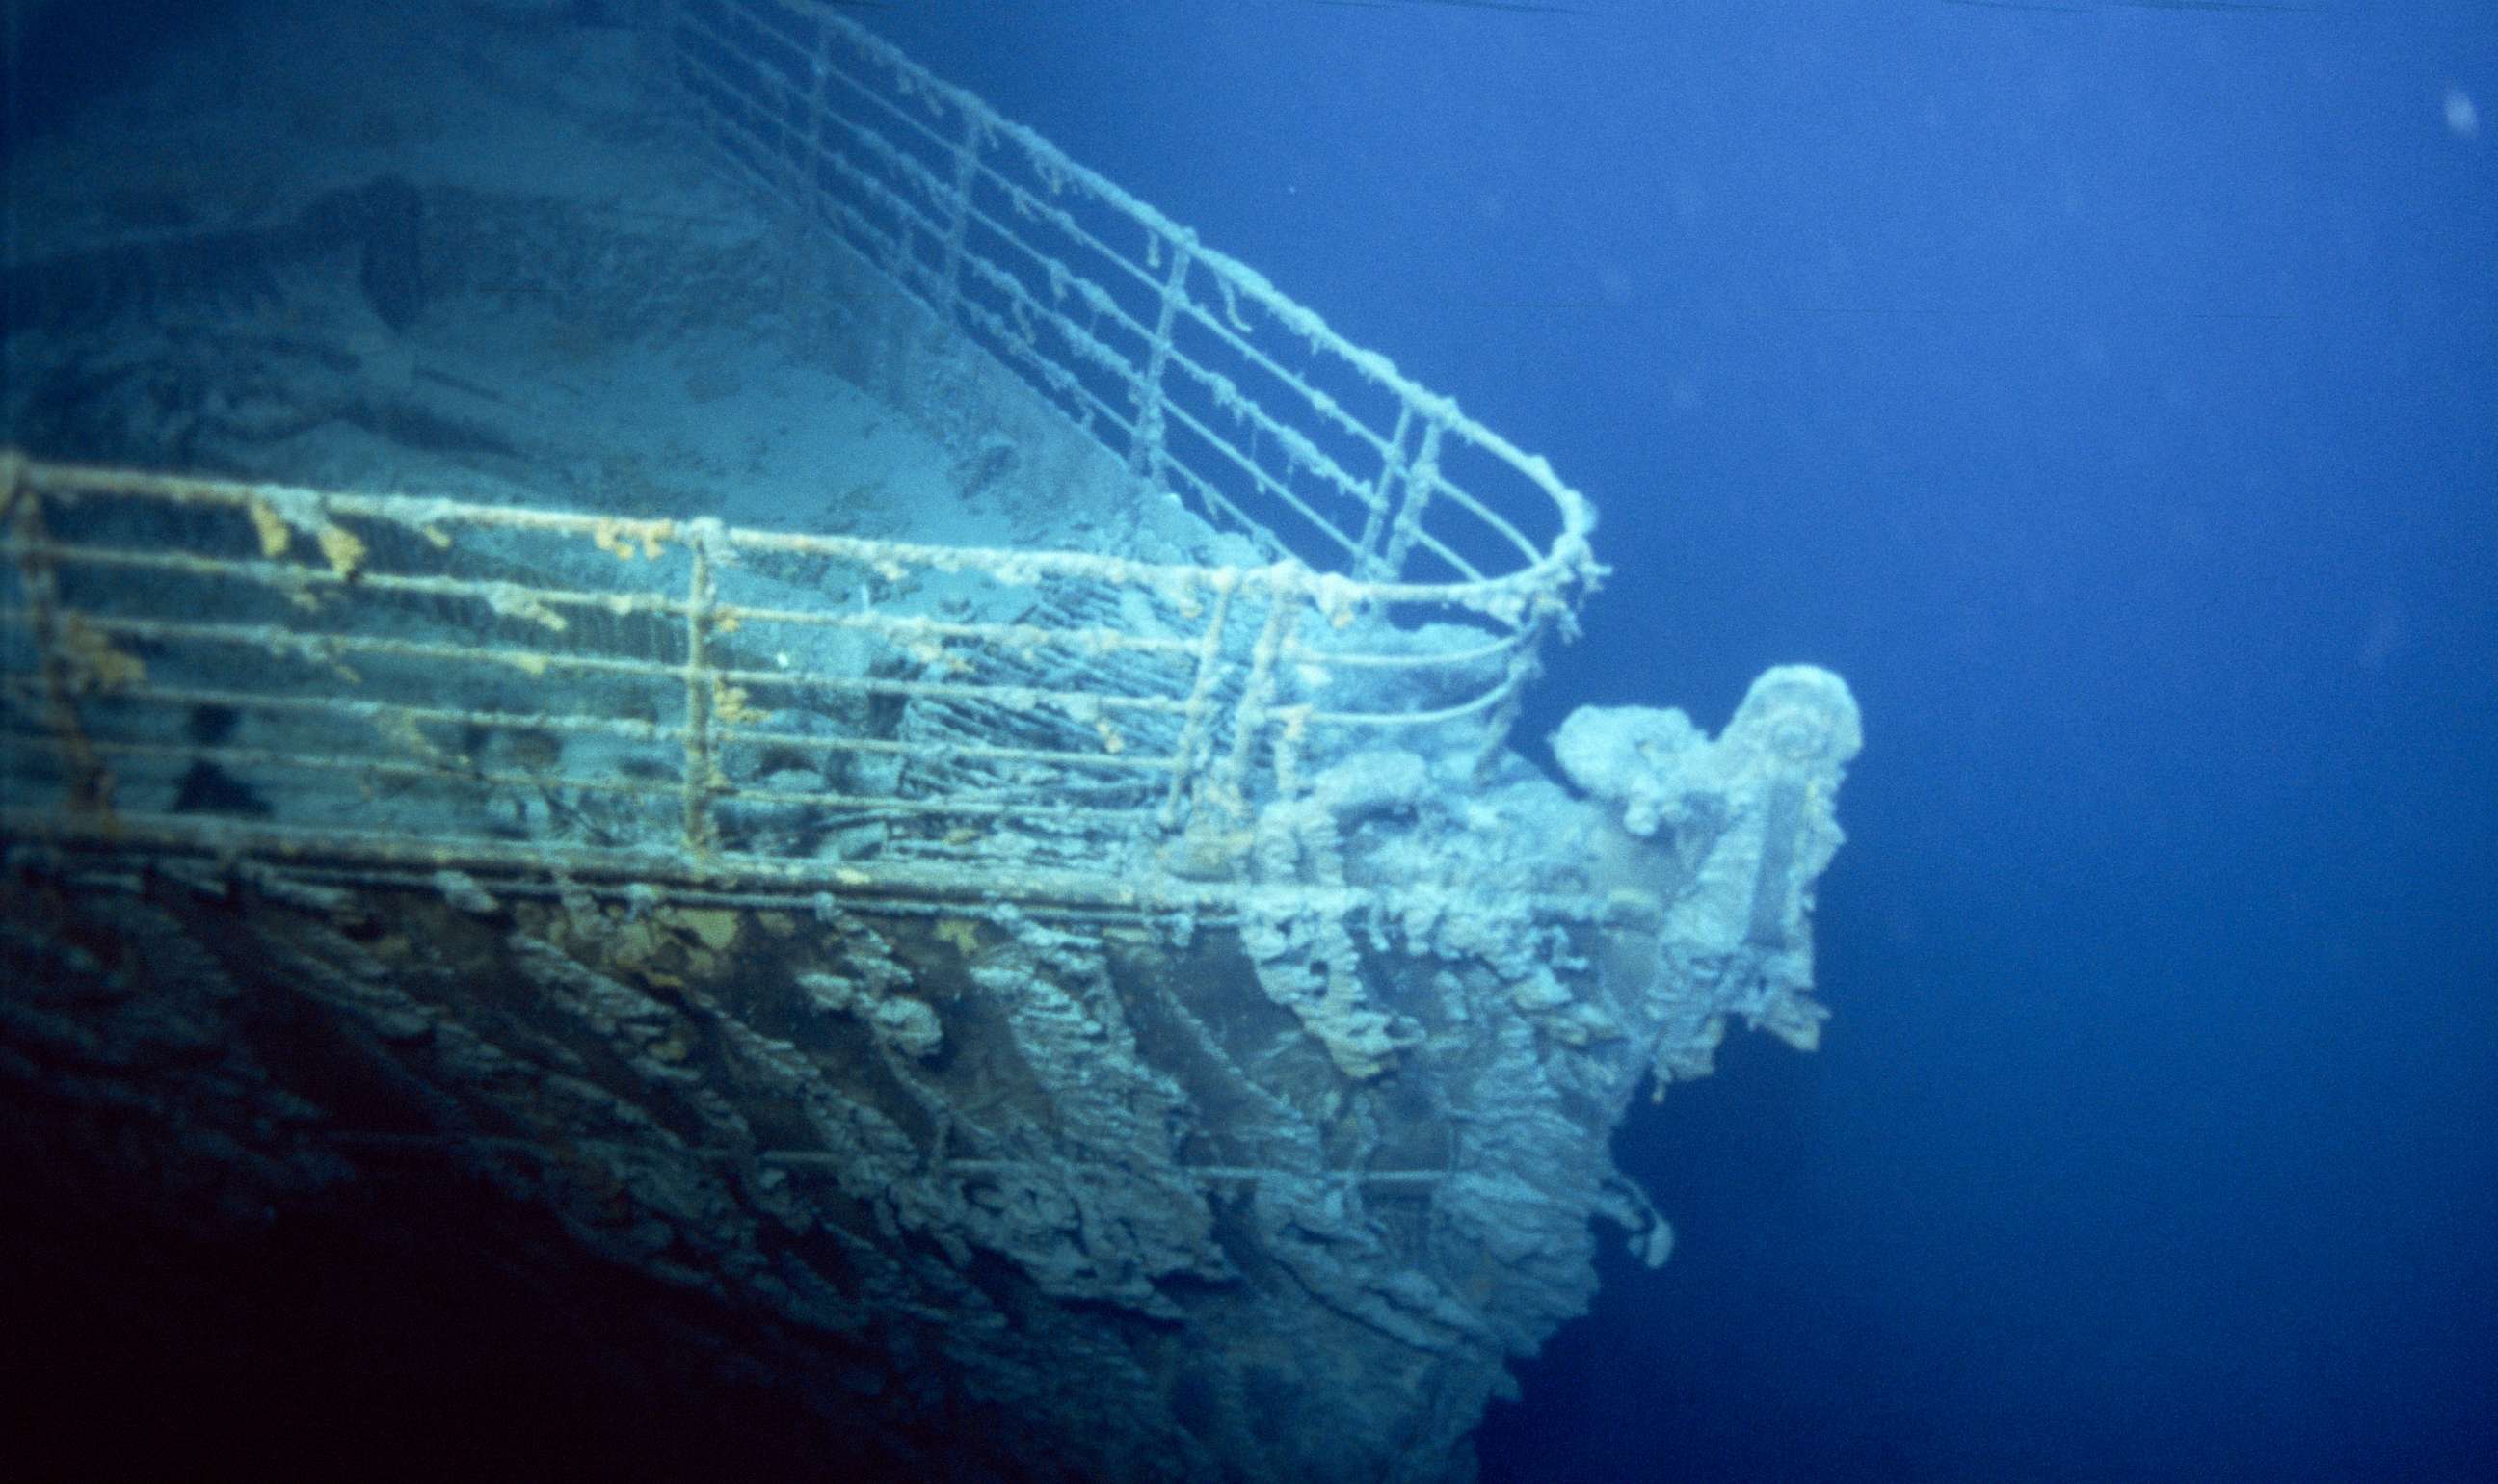 PHOTO: A part of the Titanic's bow, viewed in the Atlantic Ocean, north of Newfoundland in 1996.